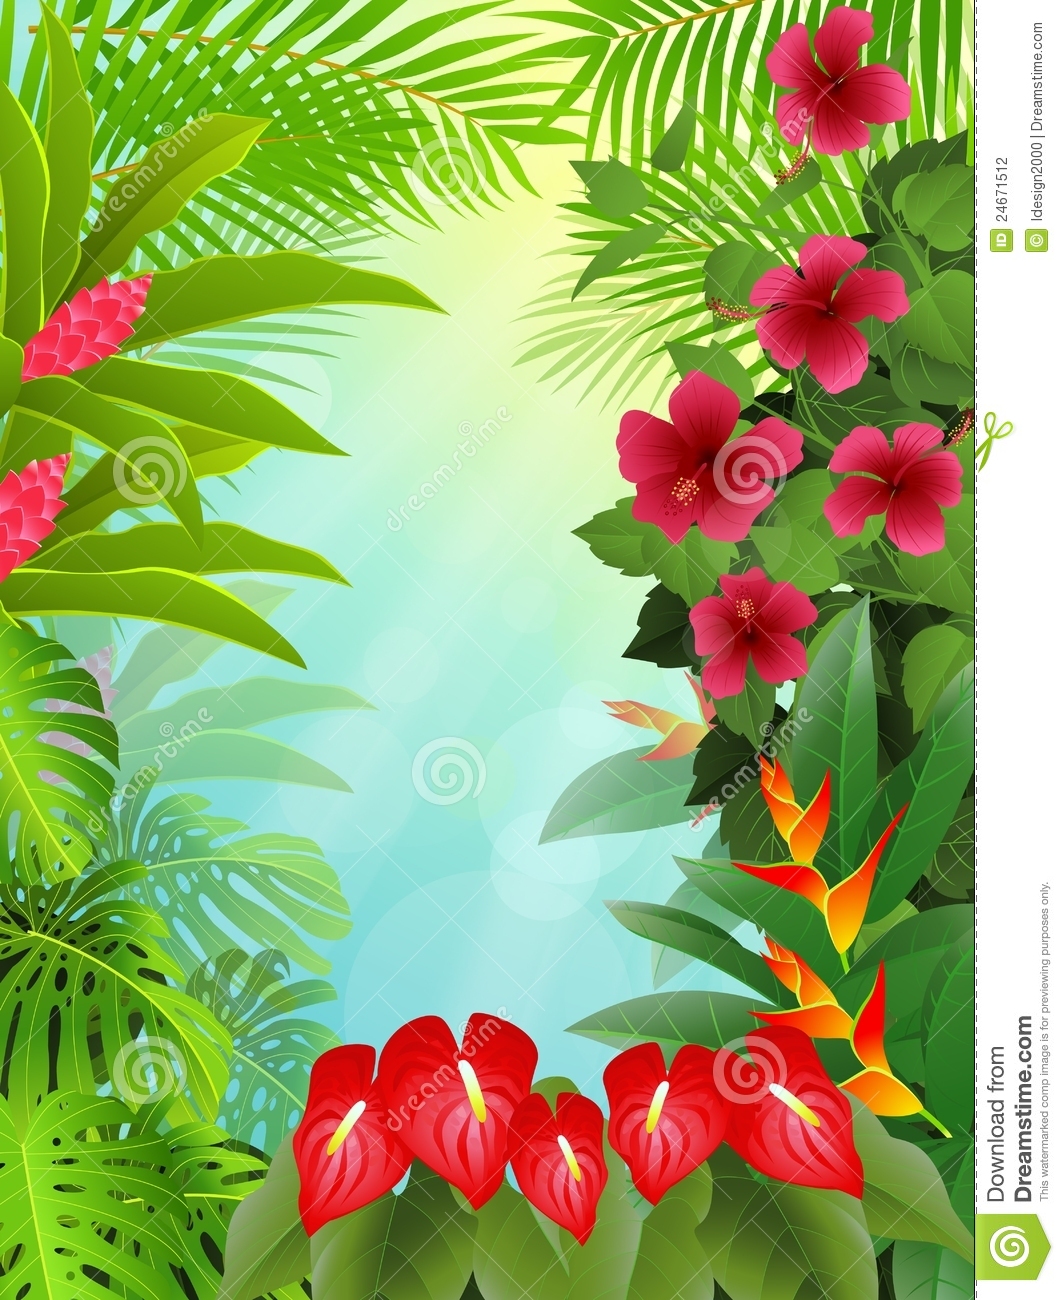 Stock Photography  Tropical Forest Background  Image  24671512